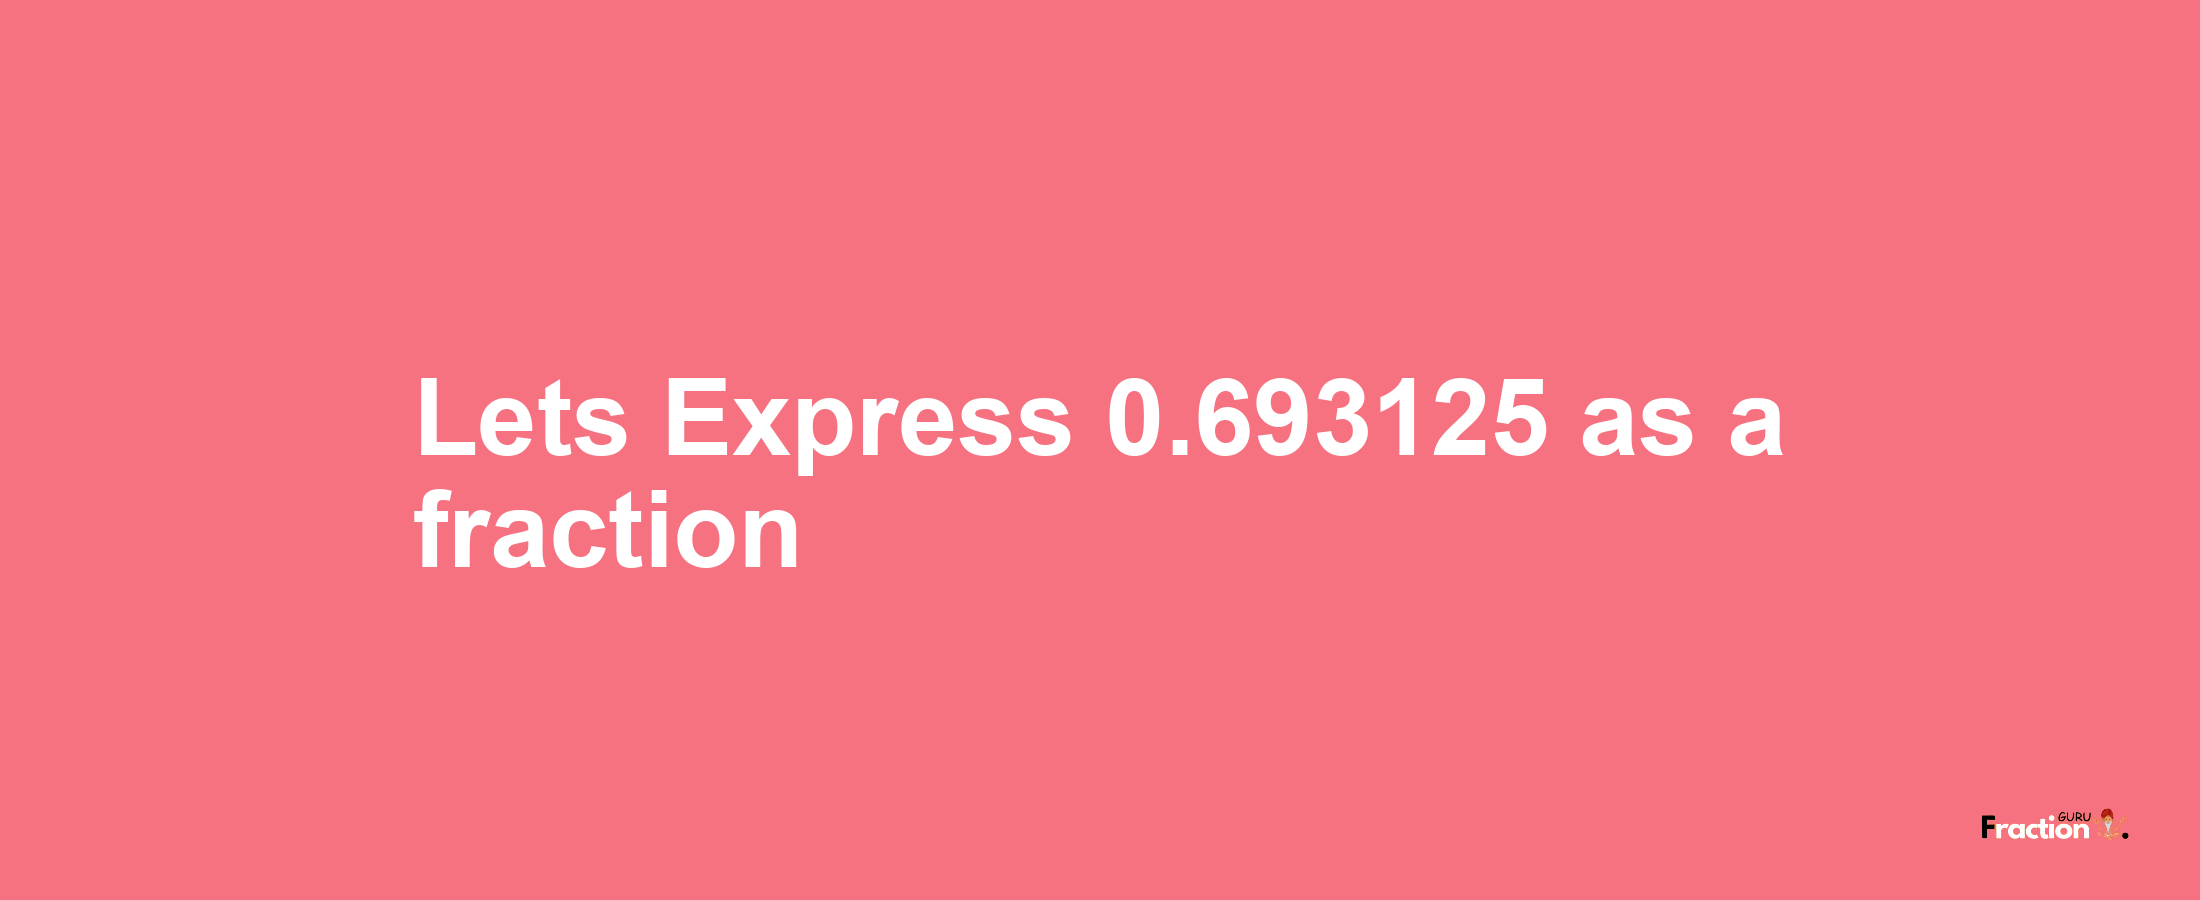 Lets Express 0.693125 as afraction